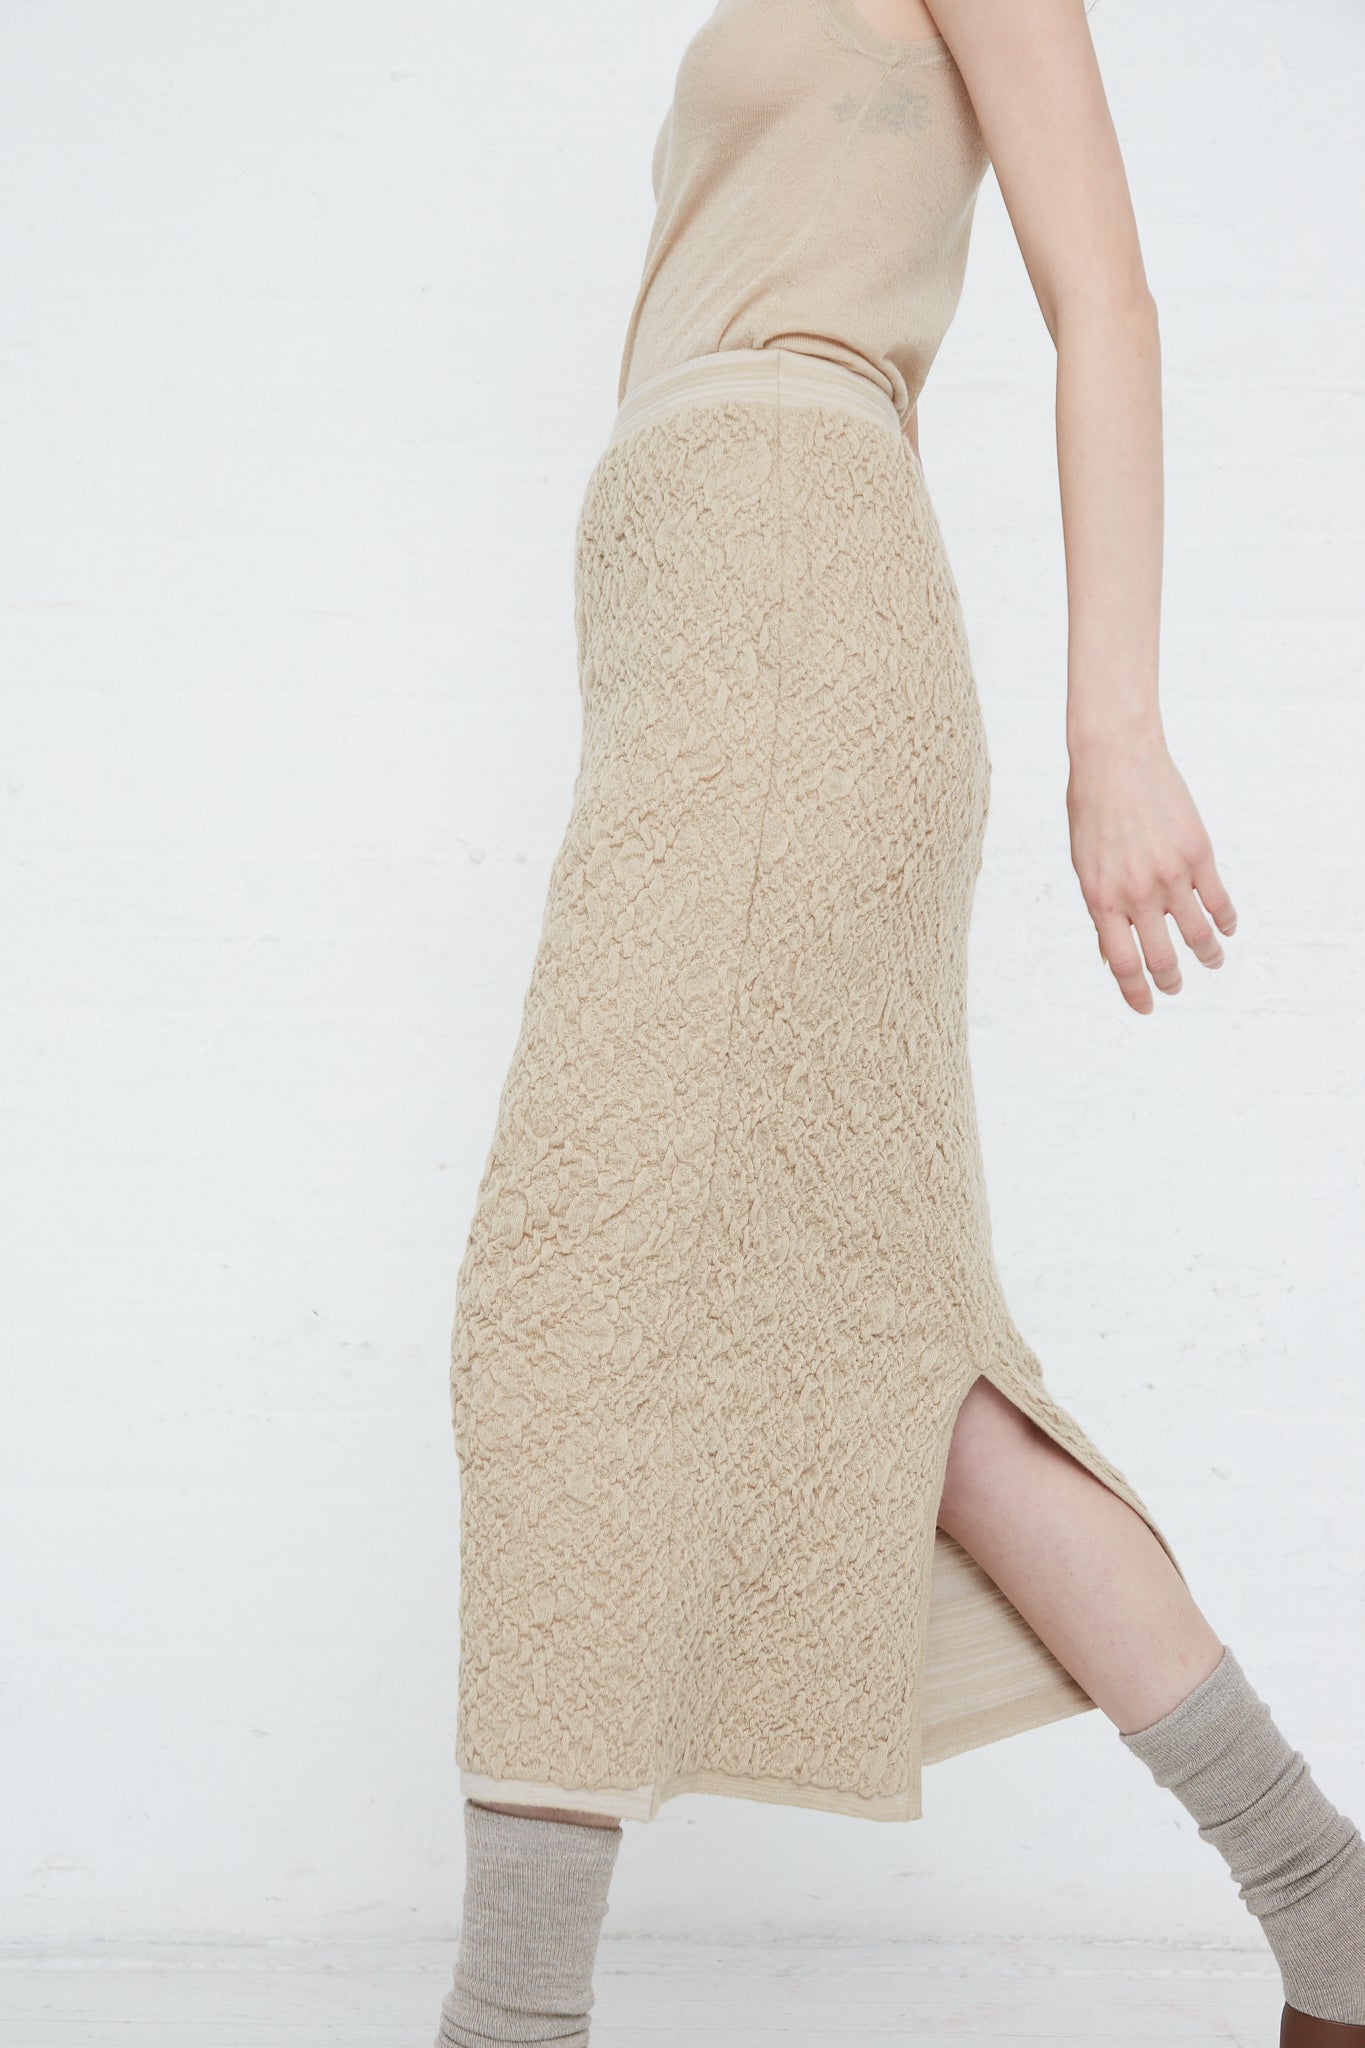 A woman wearing a Baby Alpaca Gauze Skirt in Antique by Lauren Manoogian and knit socks. Side view.